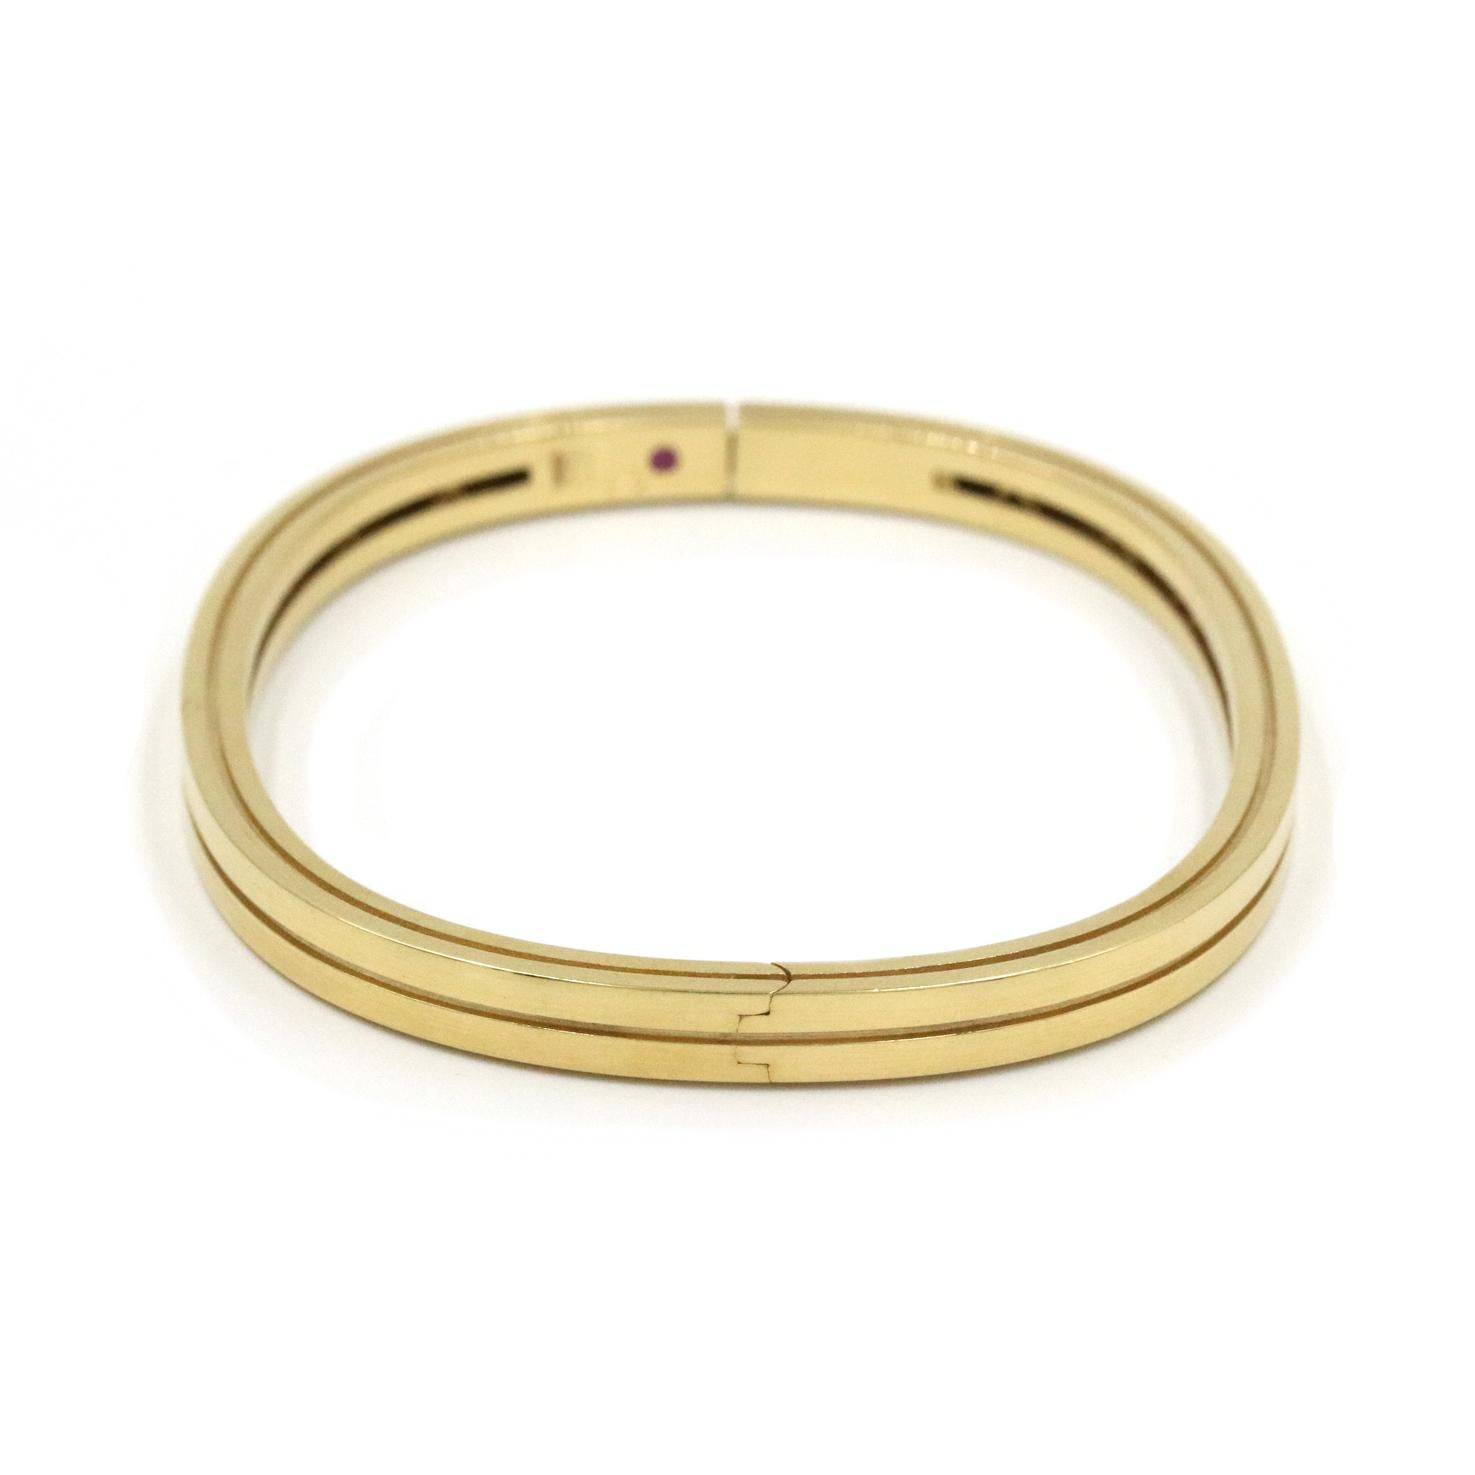 Roberto Coin Portifino 2 Row Bangle Bracelet In 18K Yellow Gold With Signature Ruby By The Hinge.